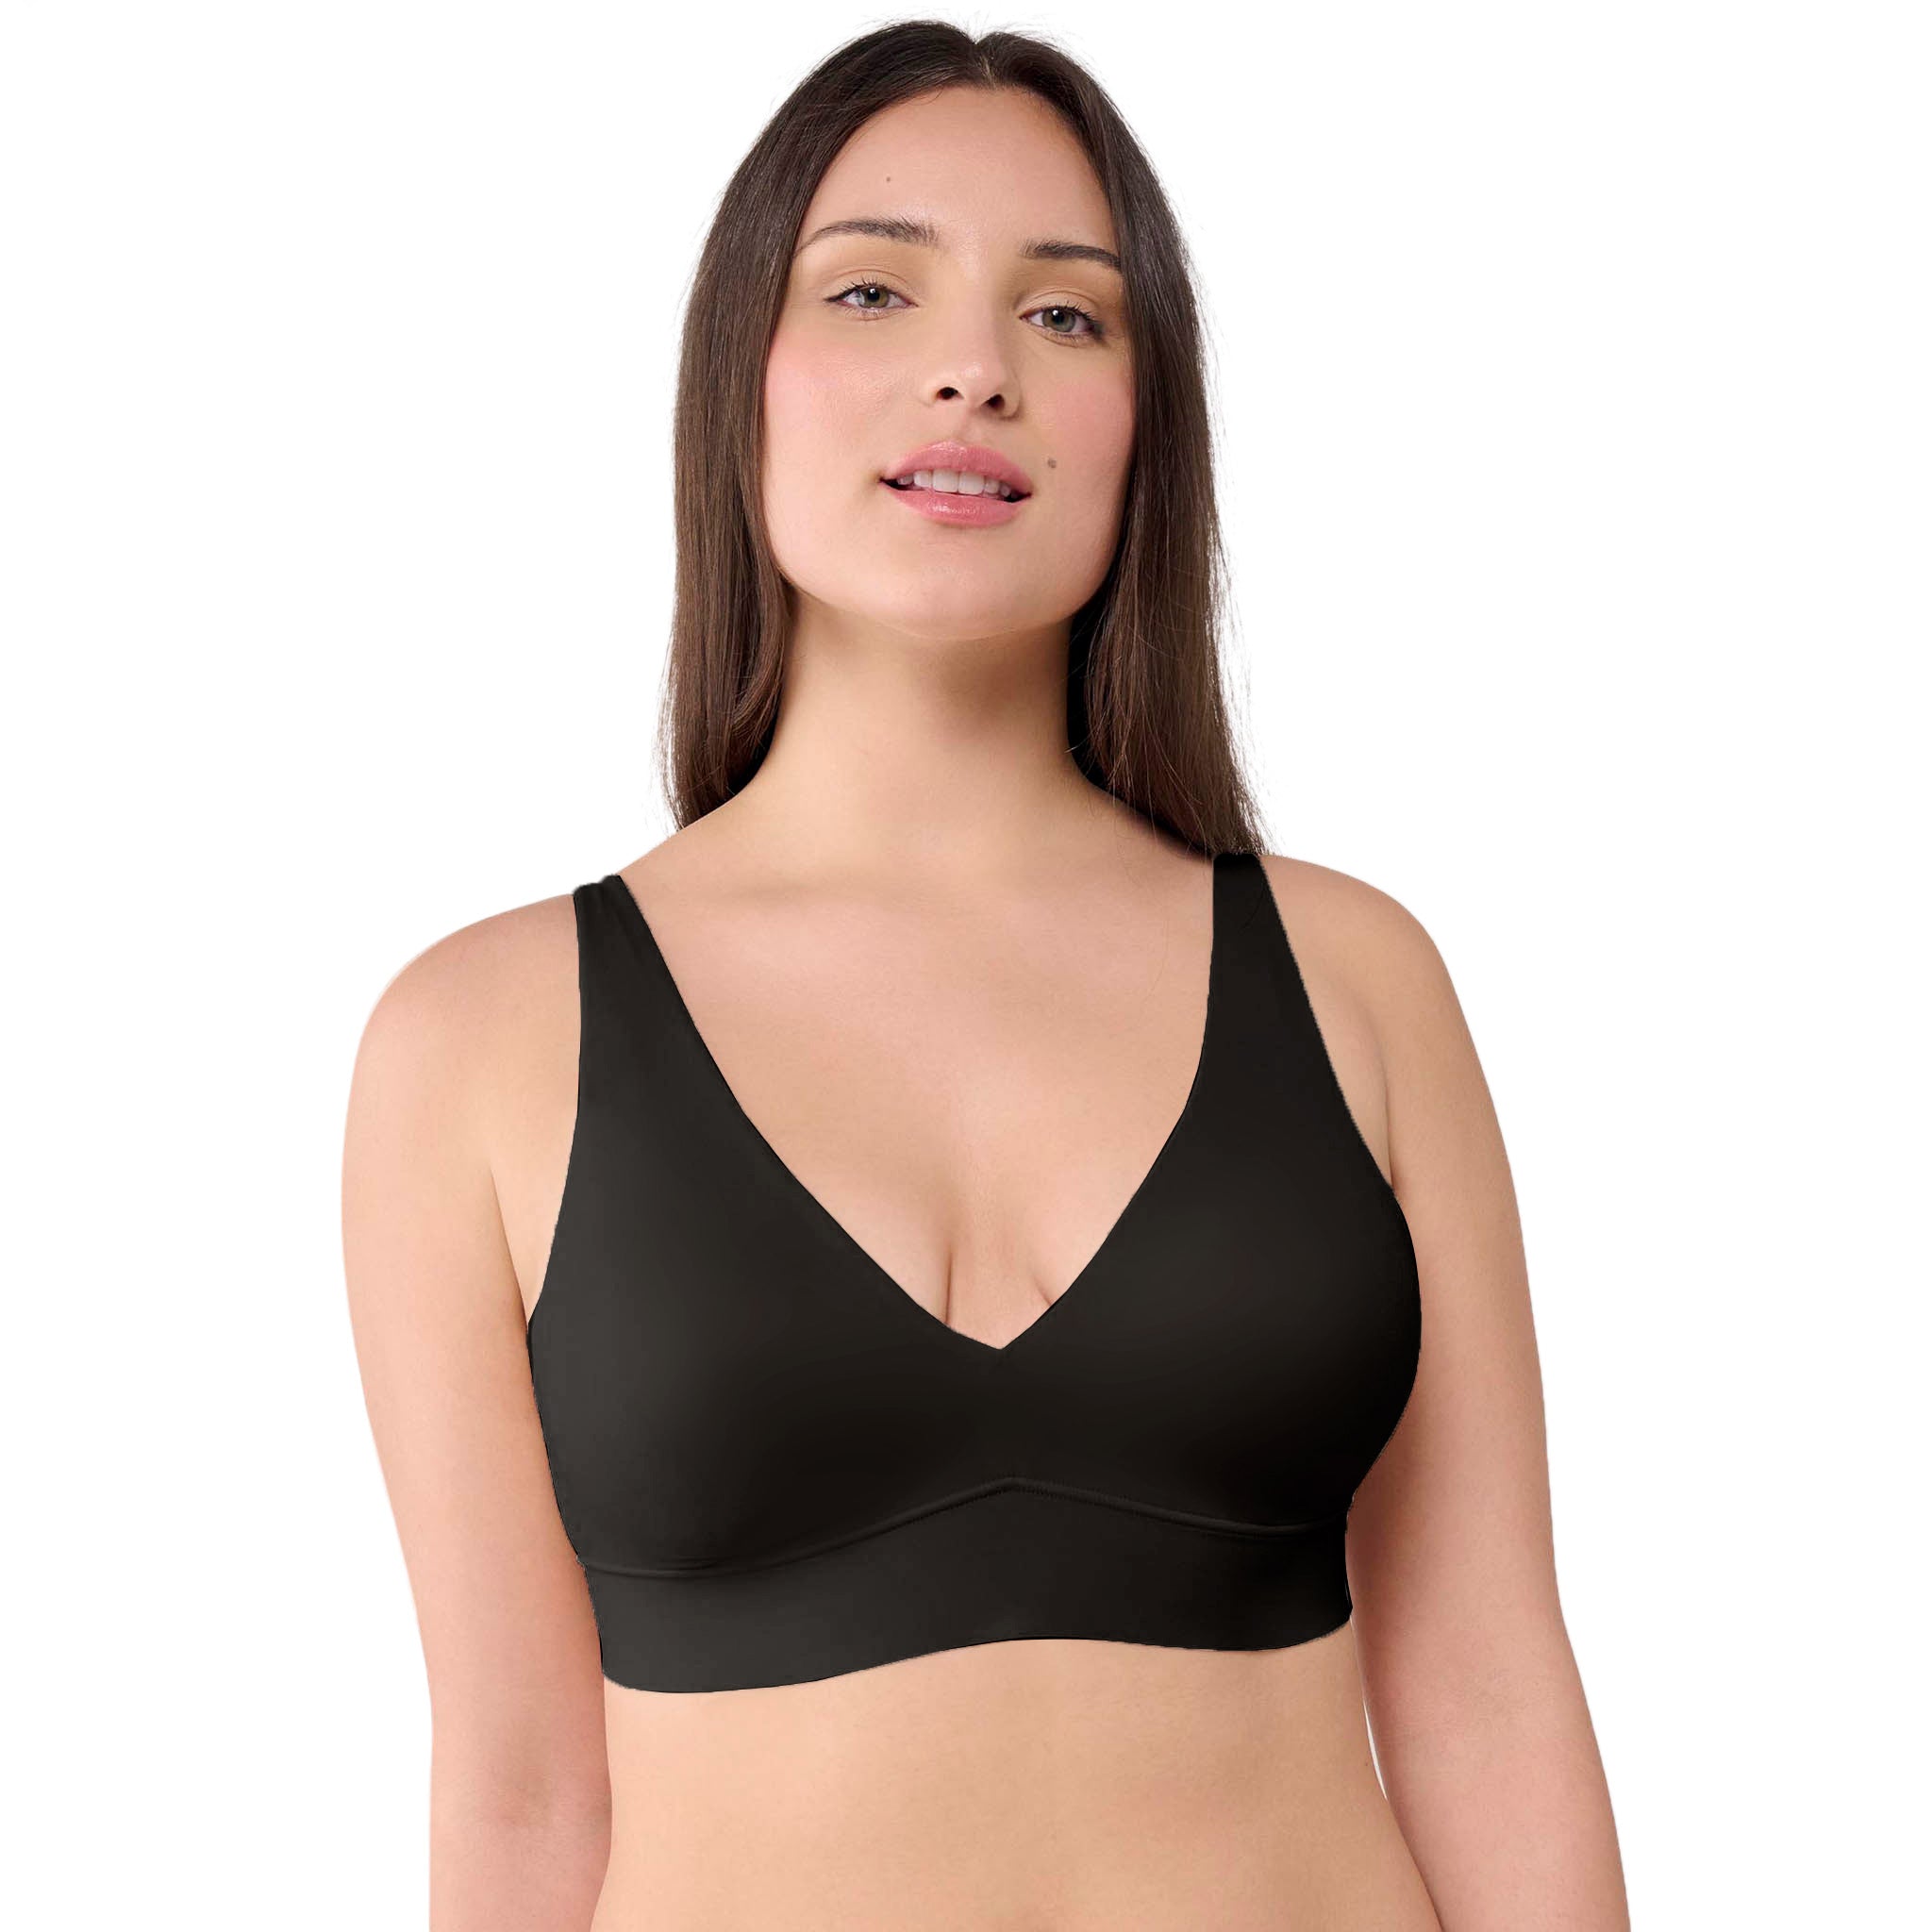 How to measure your right size bra? – Floatley